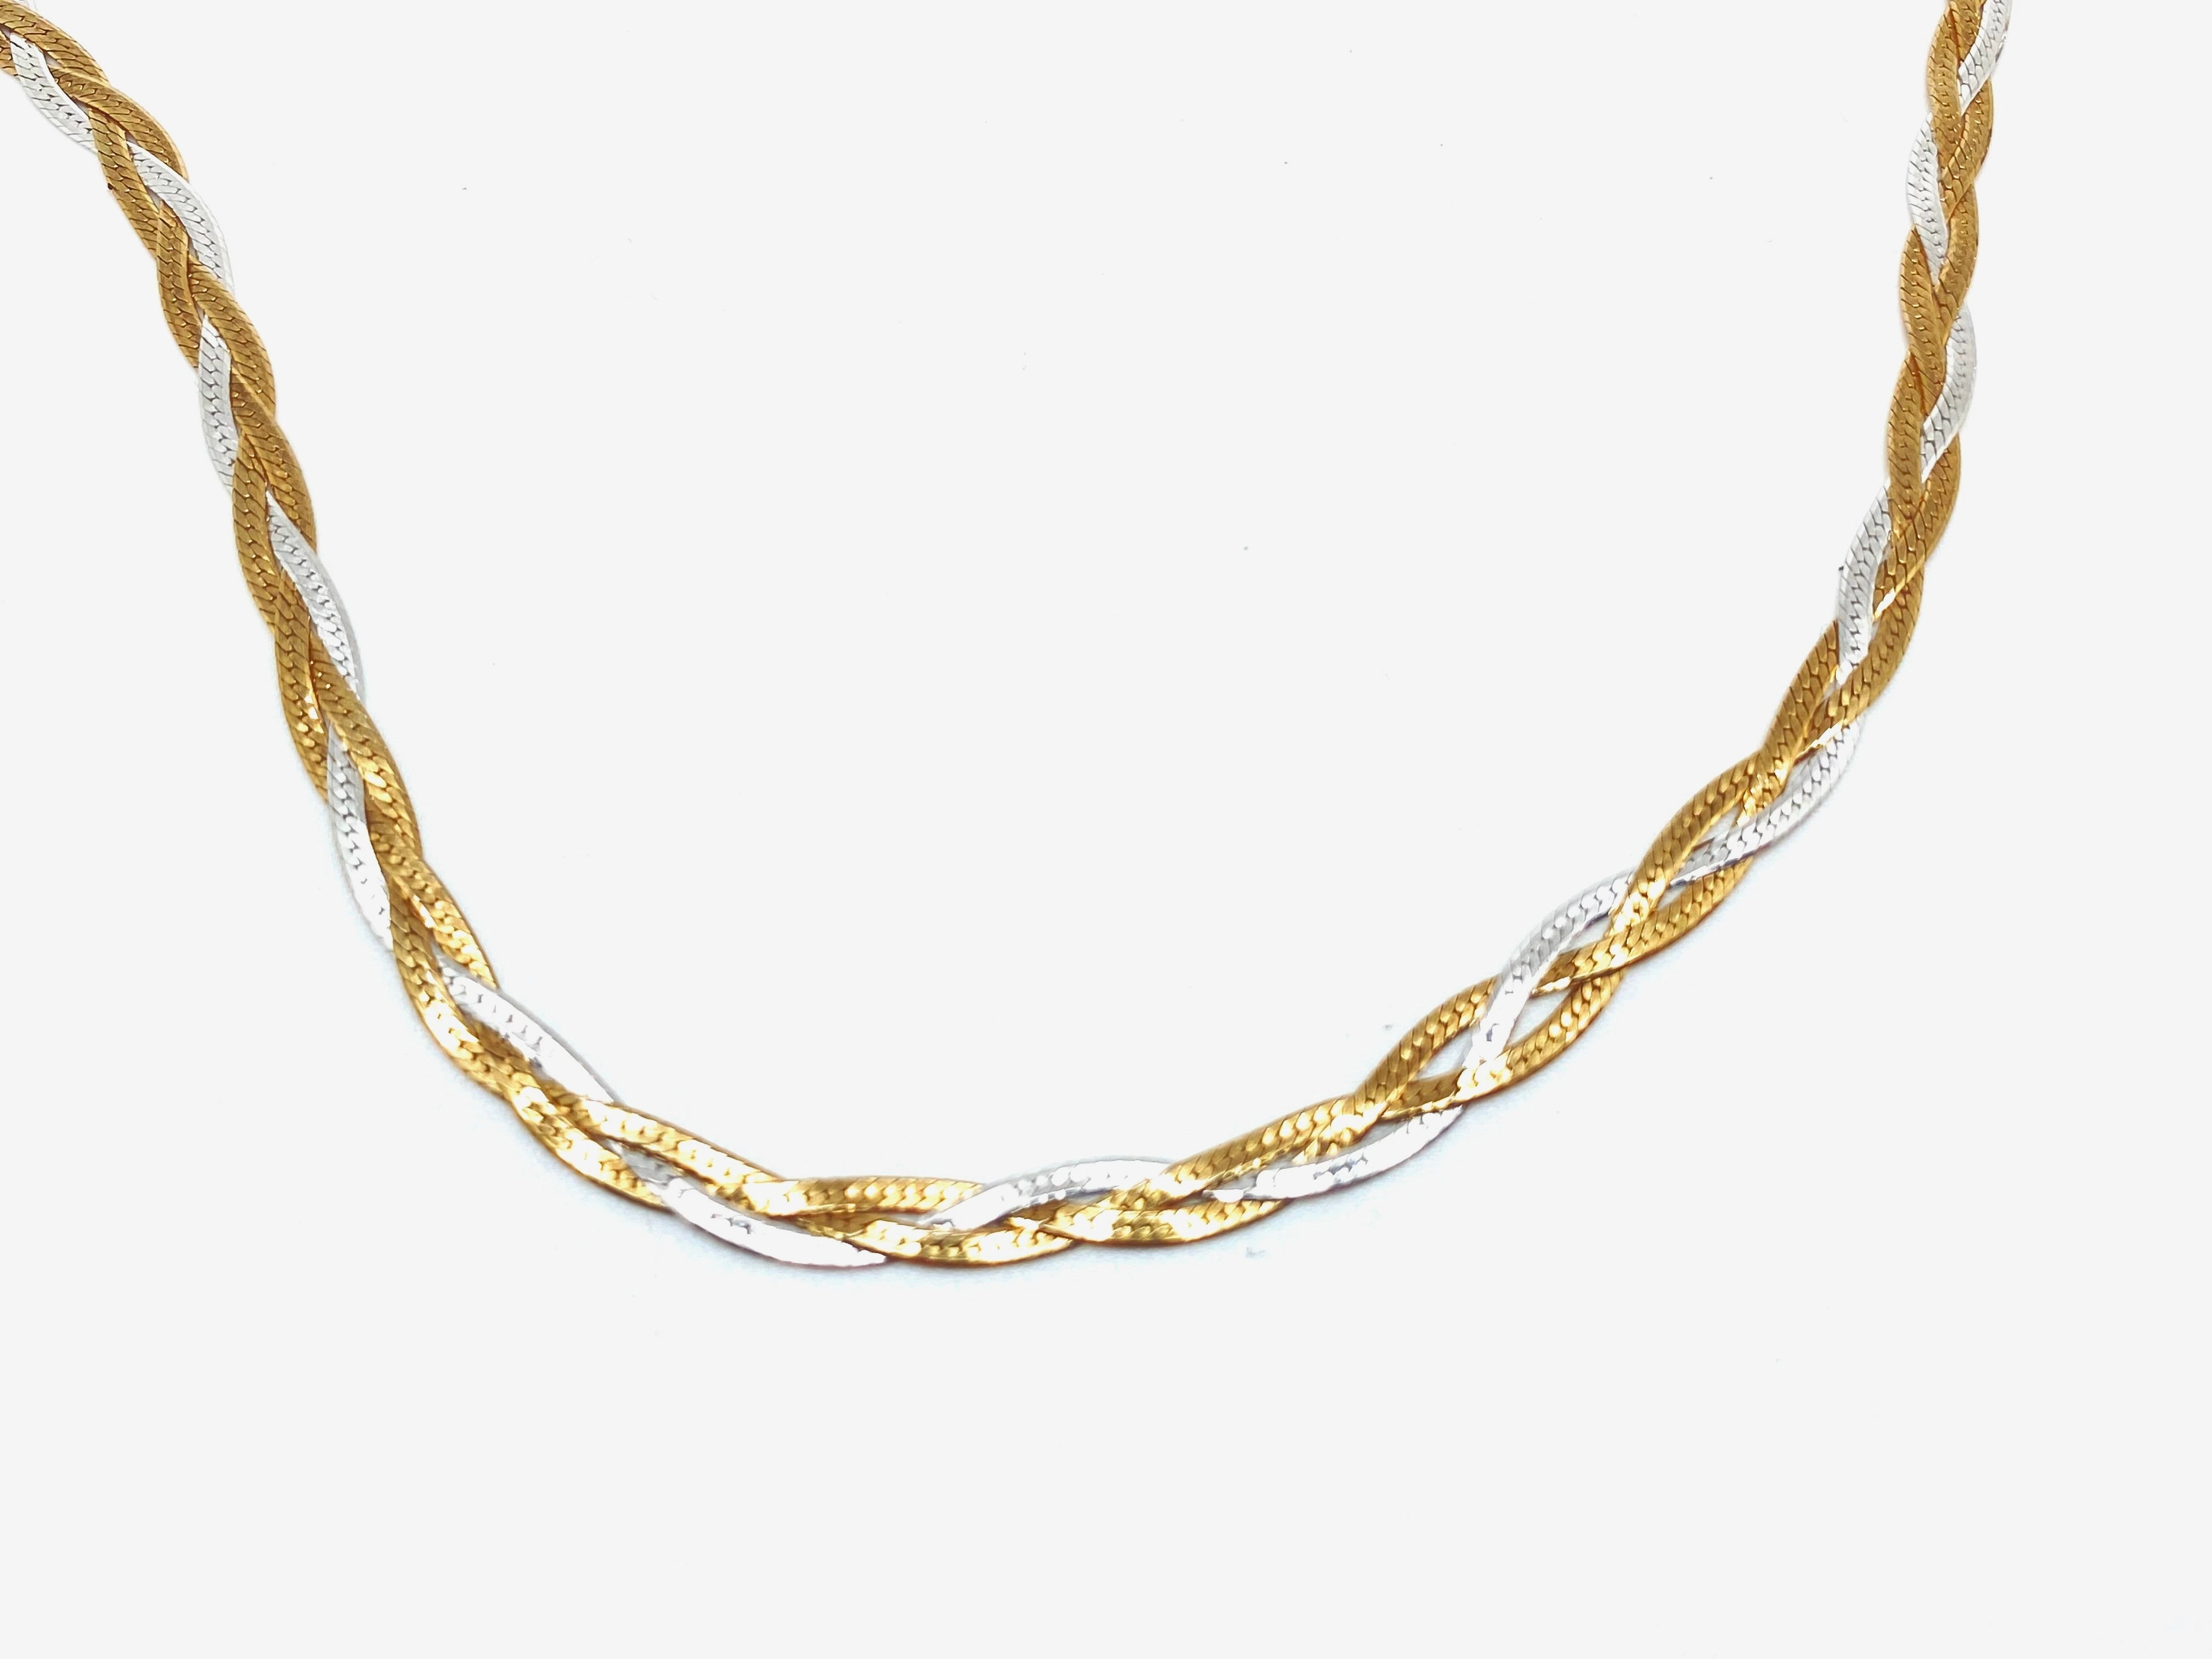 Buy Mixed Metal Necklace for Women, Interlocking Circle Infinity Necklace  Gold and Silver, Circle Pendant Eternity Jewelry Gift Online in India - Etsy